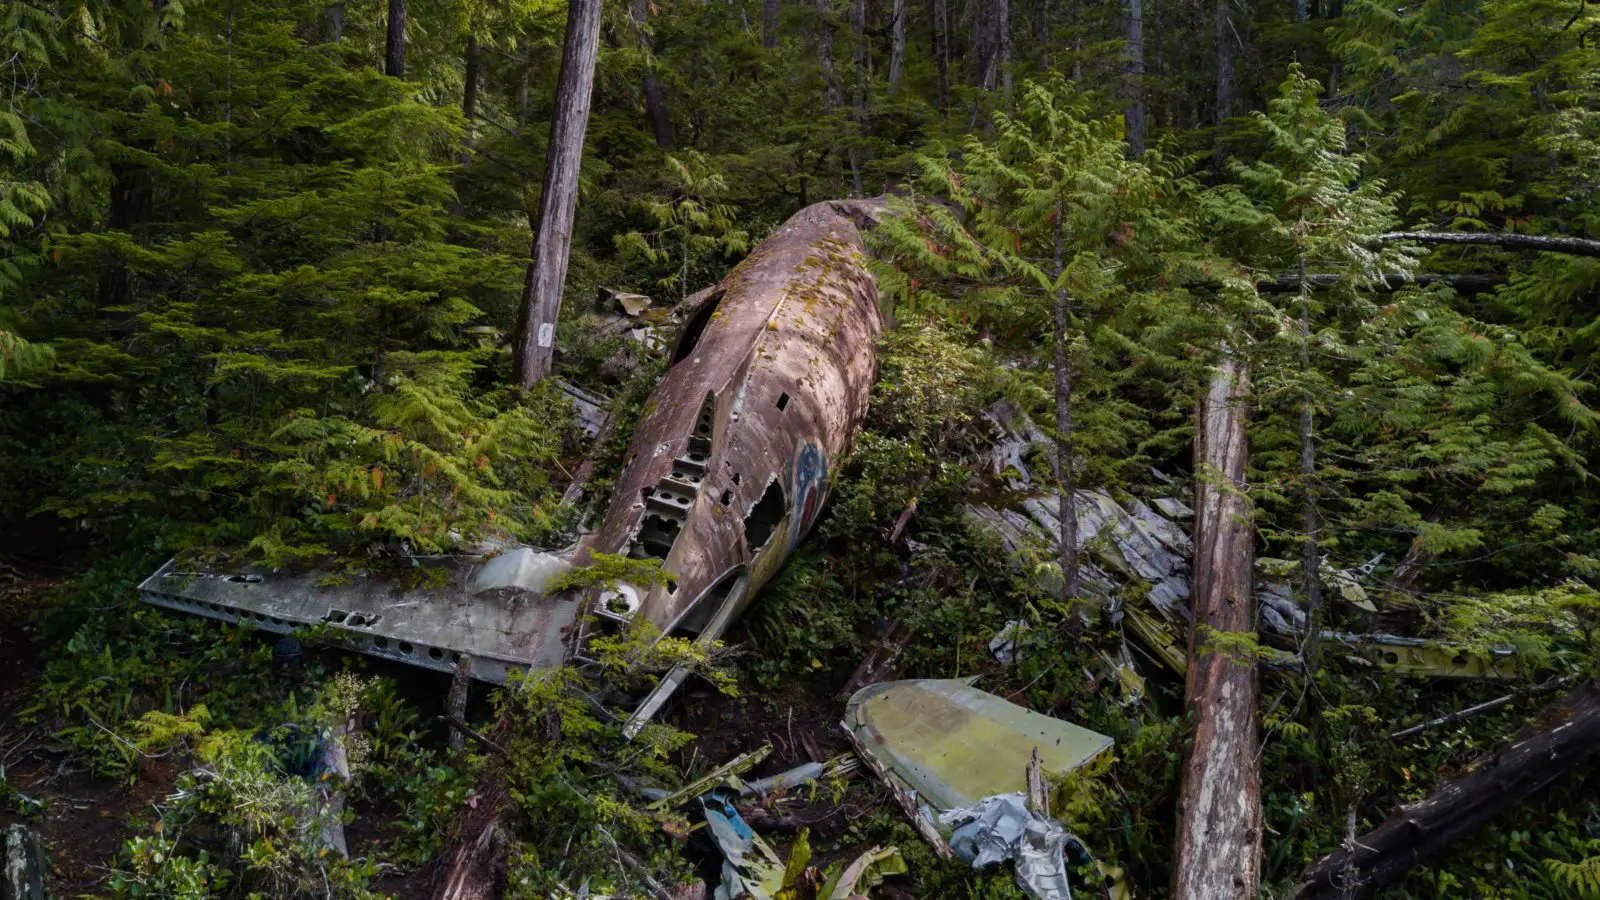 One of the best things to do in Port Hardy is to hike to the Dakota 576 Plane Crash